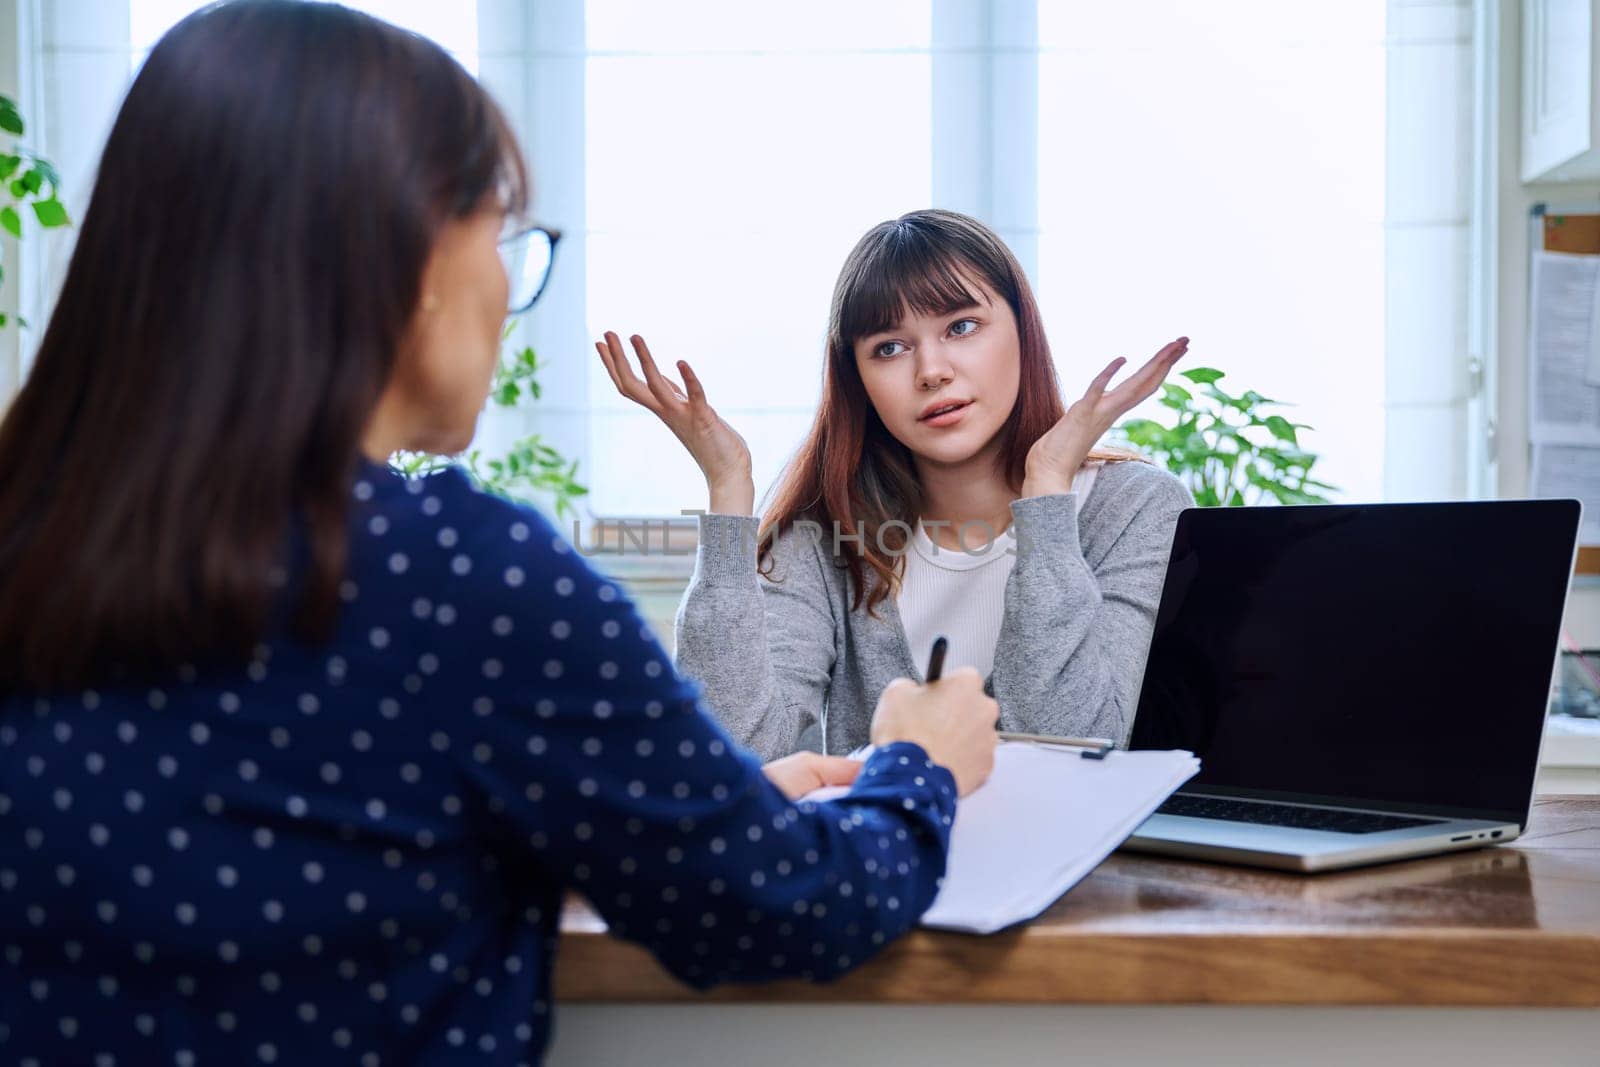 Teenage girl college student at therapy meeting with mental health professional social worker psychologist counselor sitting together in office. Psychology, psychotherapy, mental assistance support